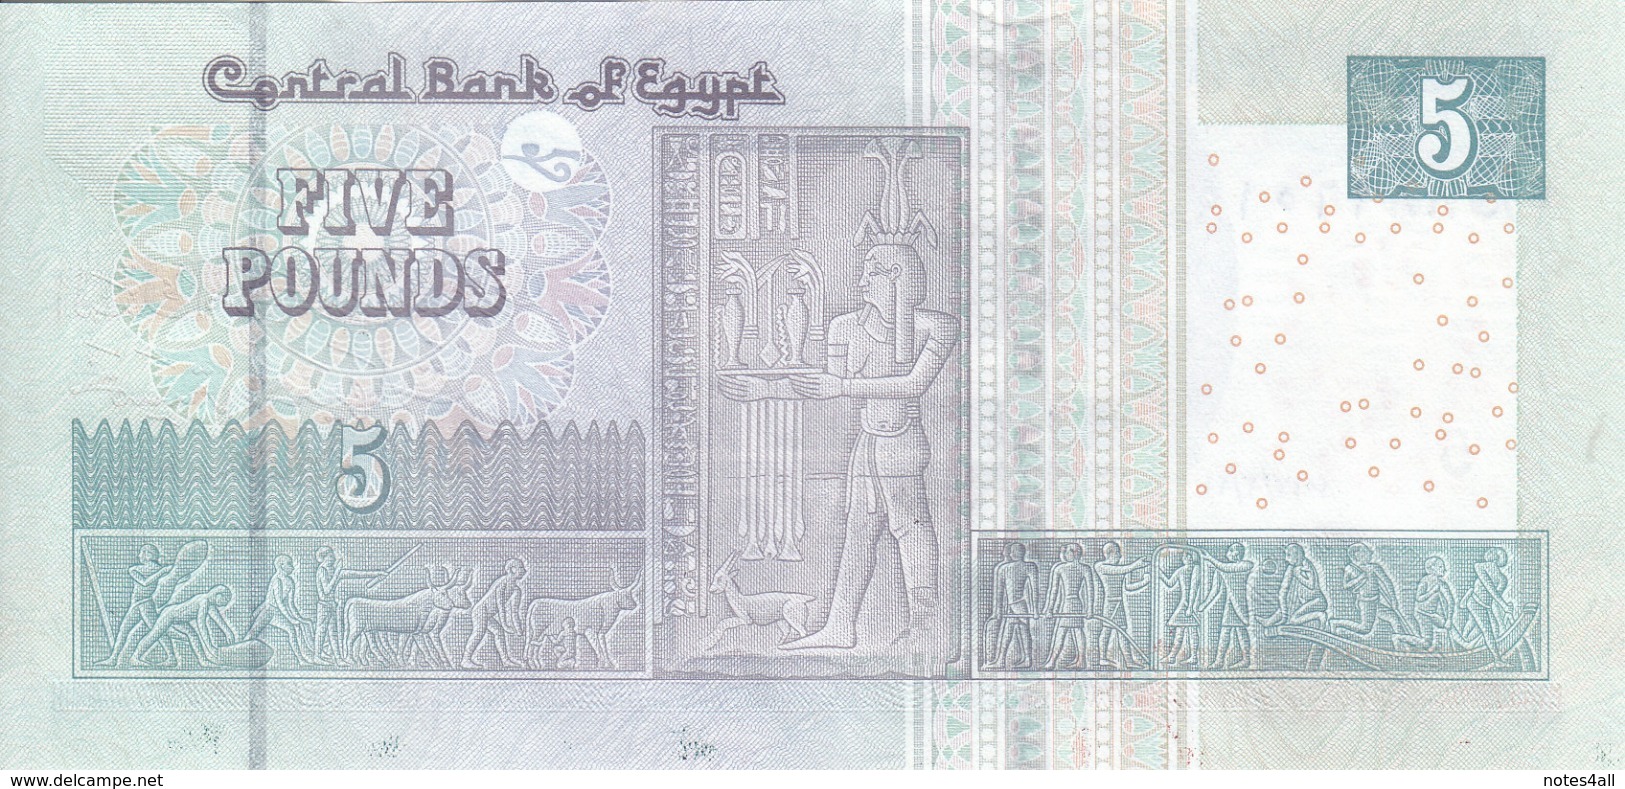 EGYPT 5 POUNDS EGP 2017 P-70b SIG/ T.AMER #24 UNC REPLACEMENT 900 (SPACE OUT) SPACING - Egypt